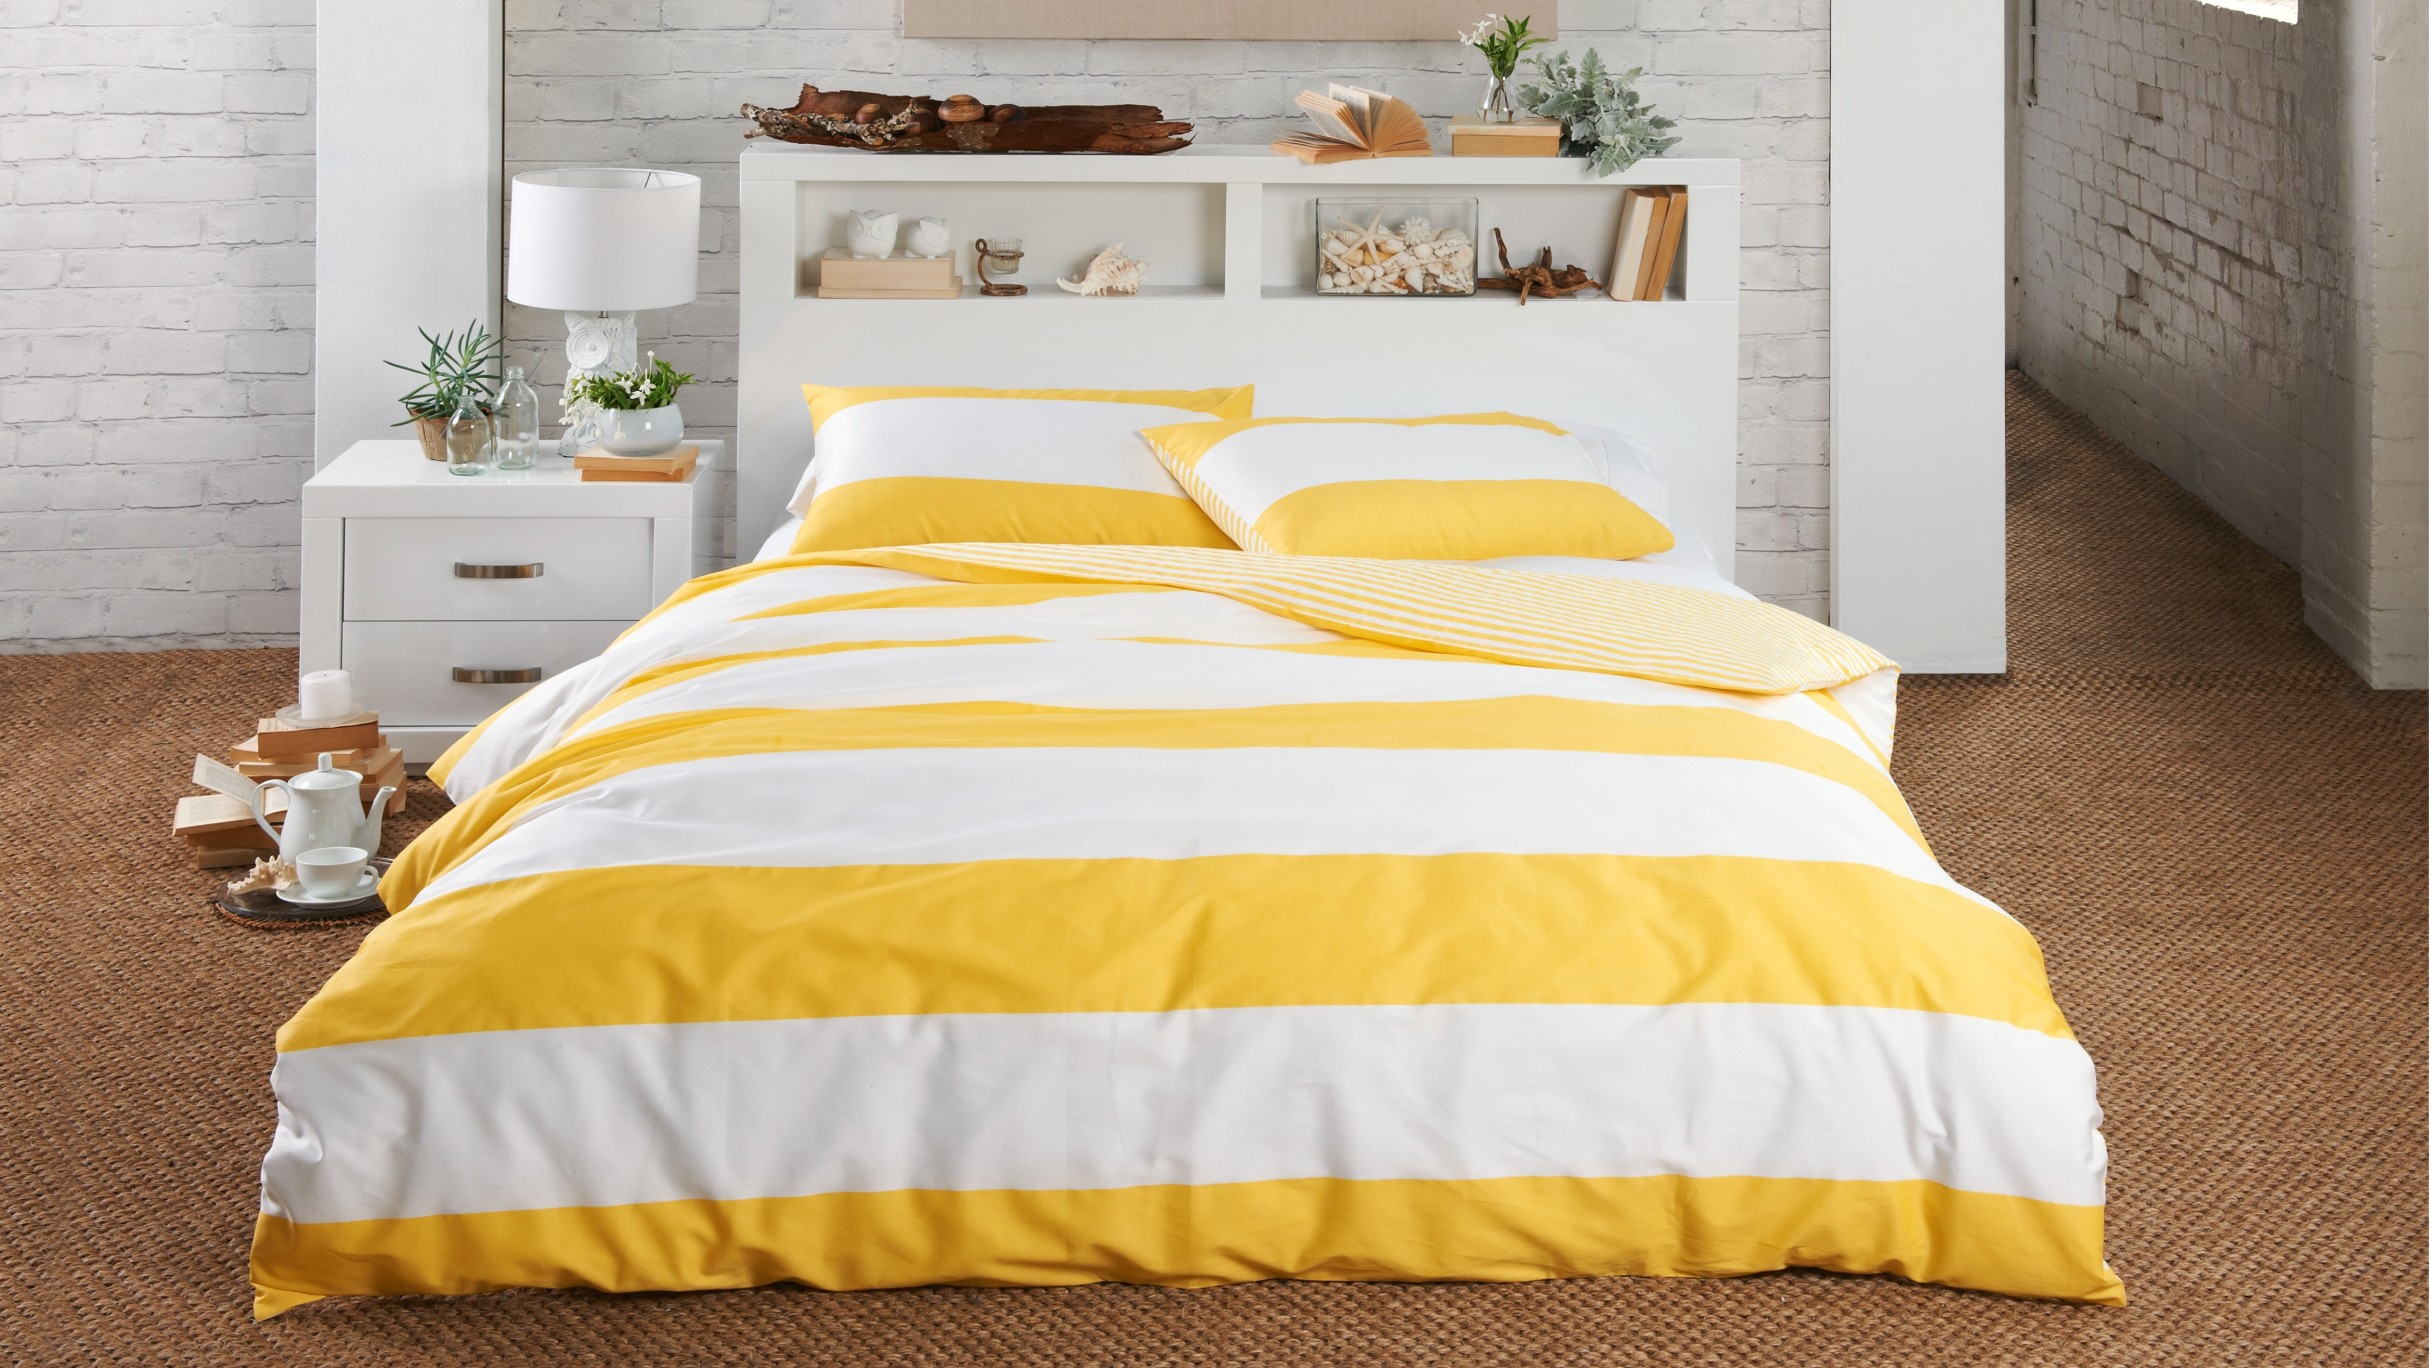 White Yellow On Amazing White Yellow Duvet Cover On White Bedding Involved White Wooden Open Cabinets In Headboard And White Nightstand Bedroom Solid Yellow Duvet Cover For Bright Bedroom Designs